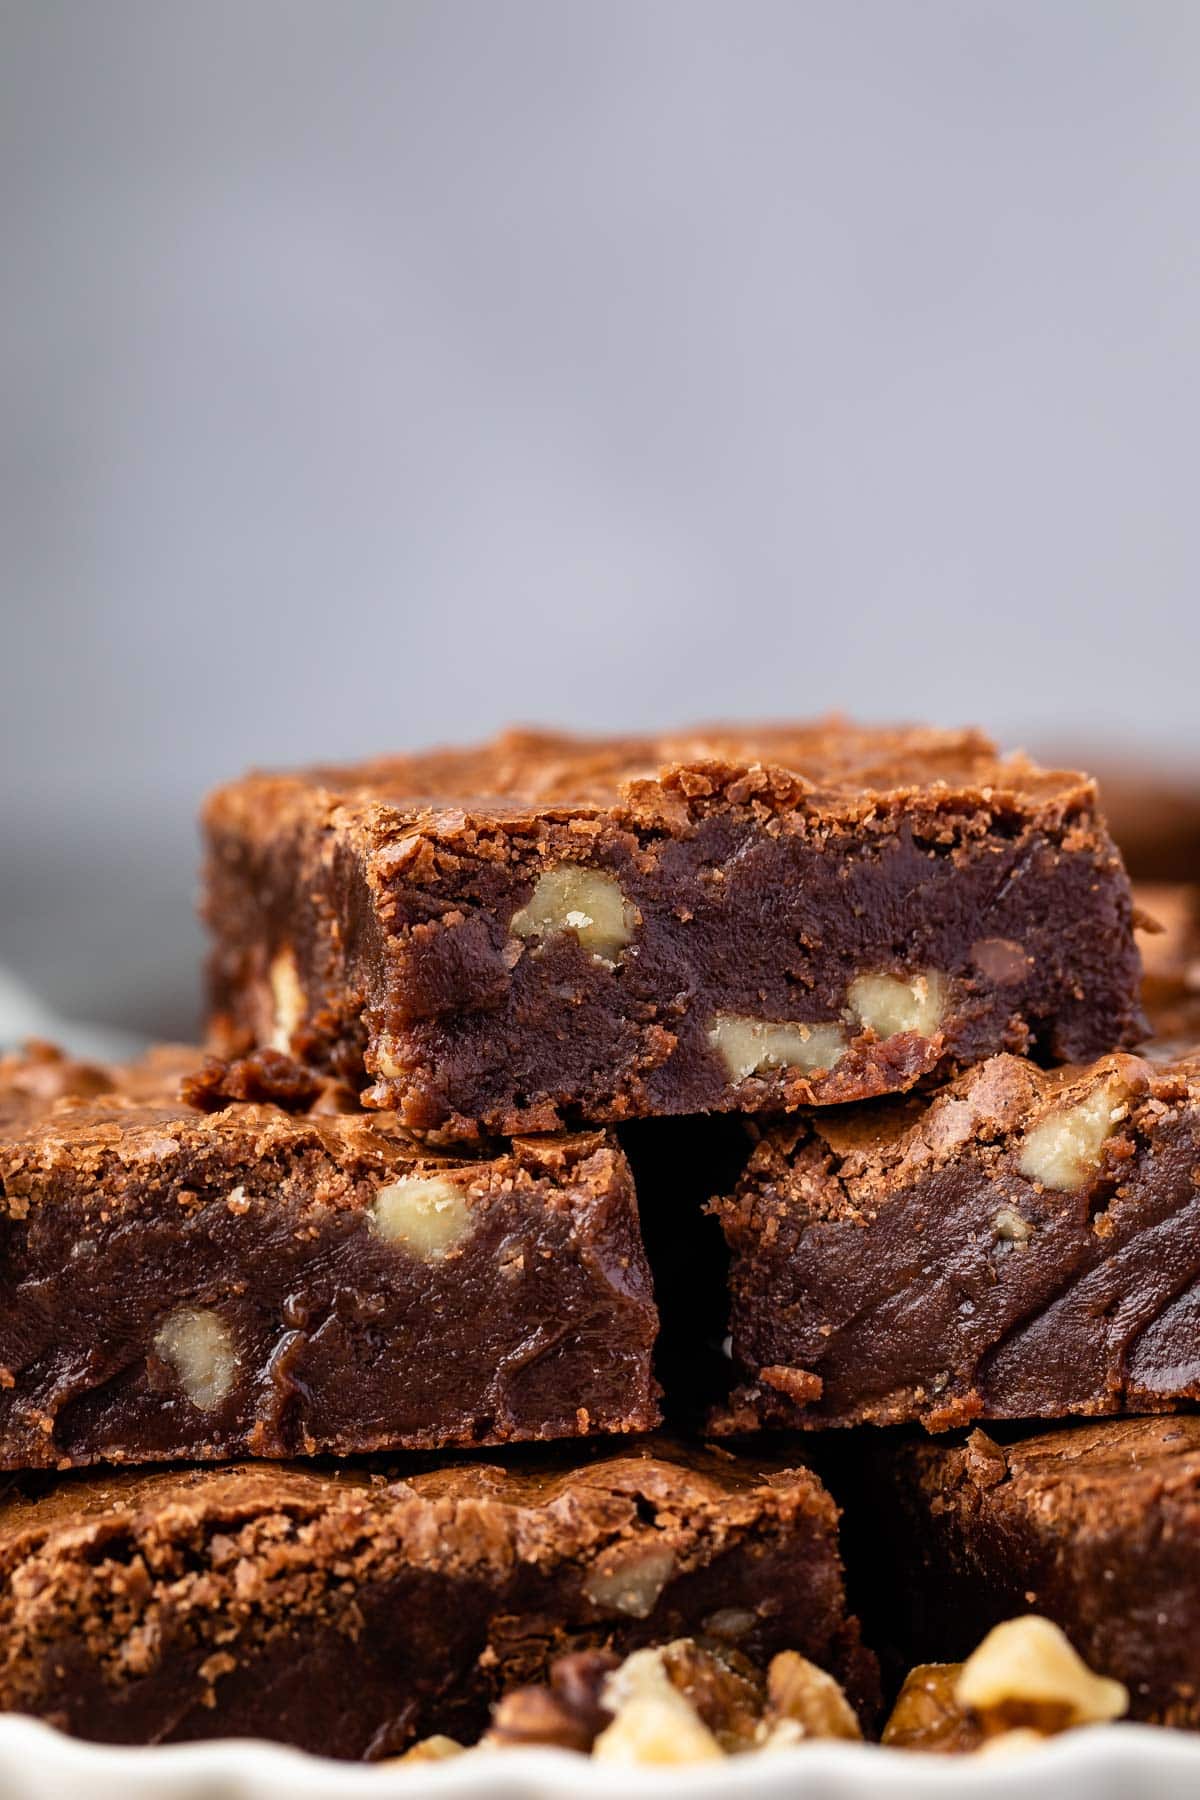 stacked brownies with walnuts baked in.